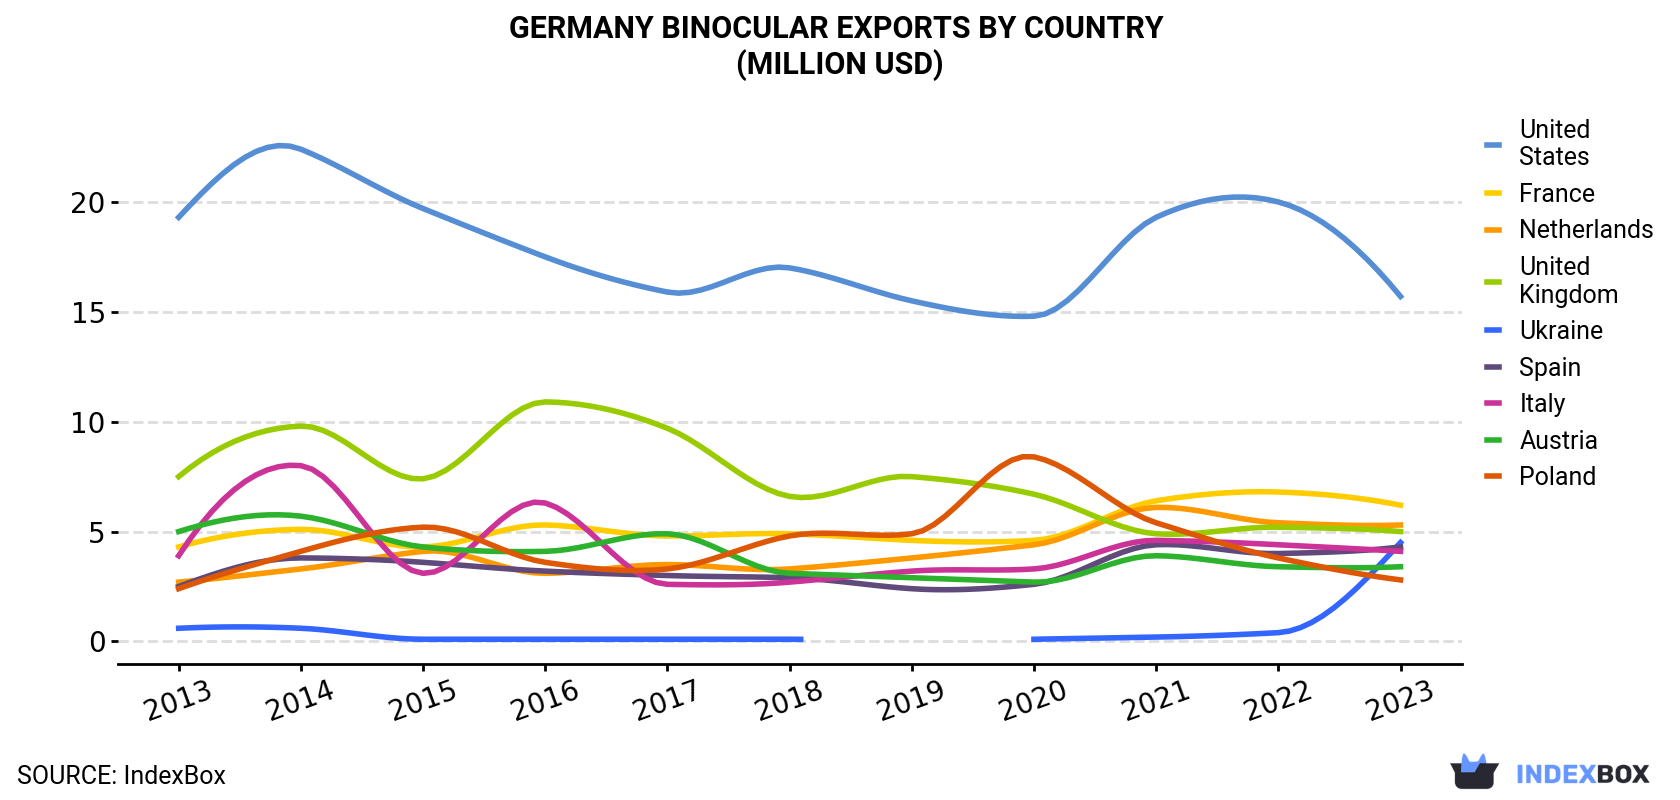 Germany Binocular Exports By Country (Million USD)